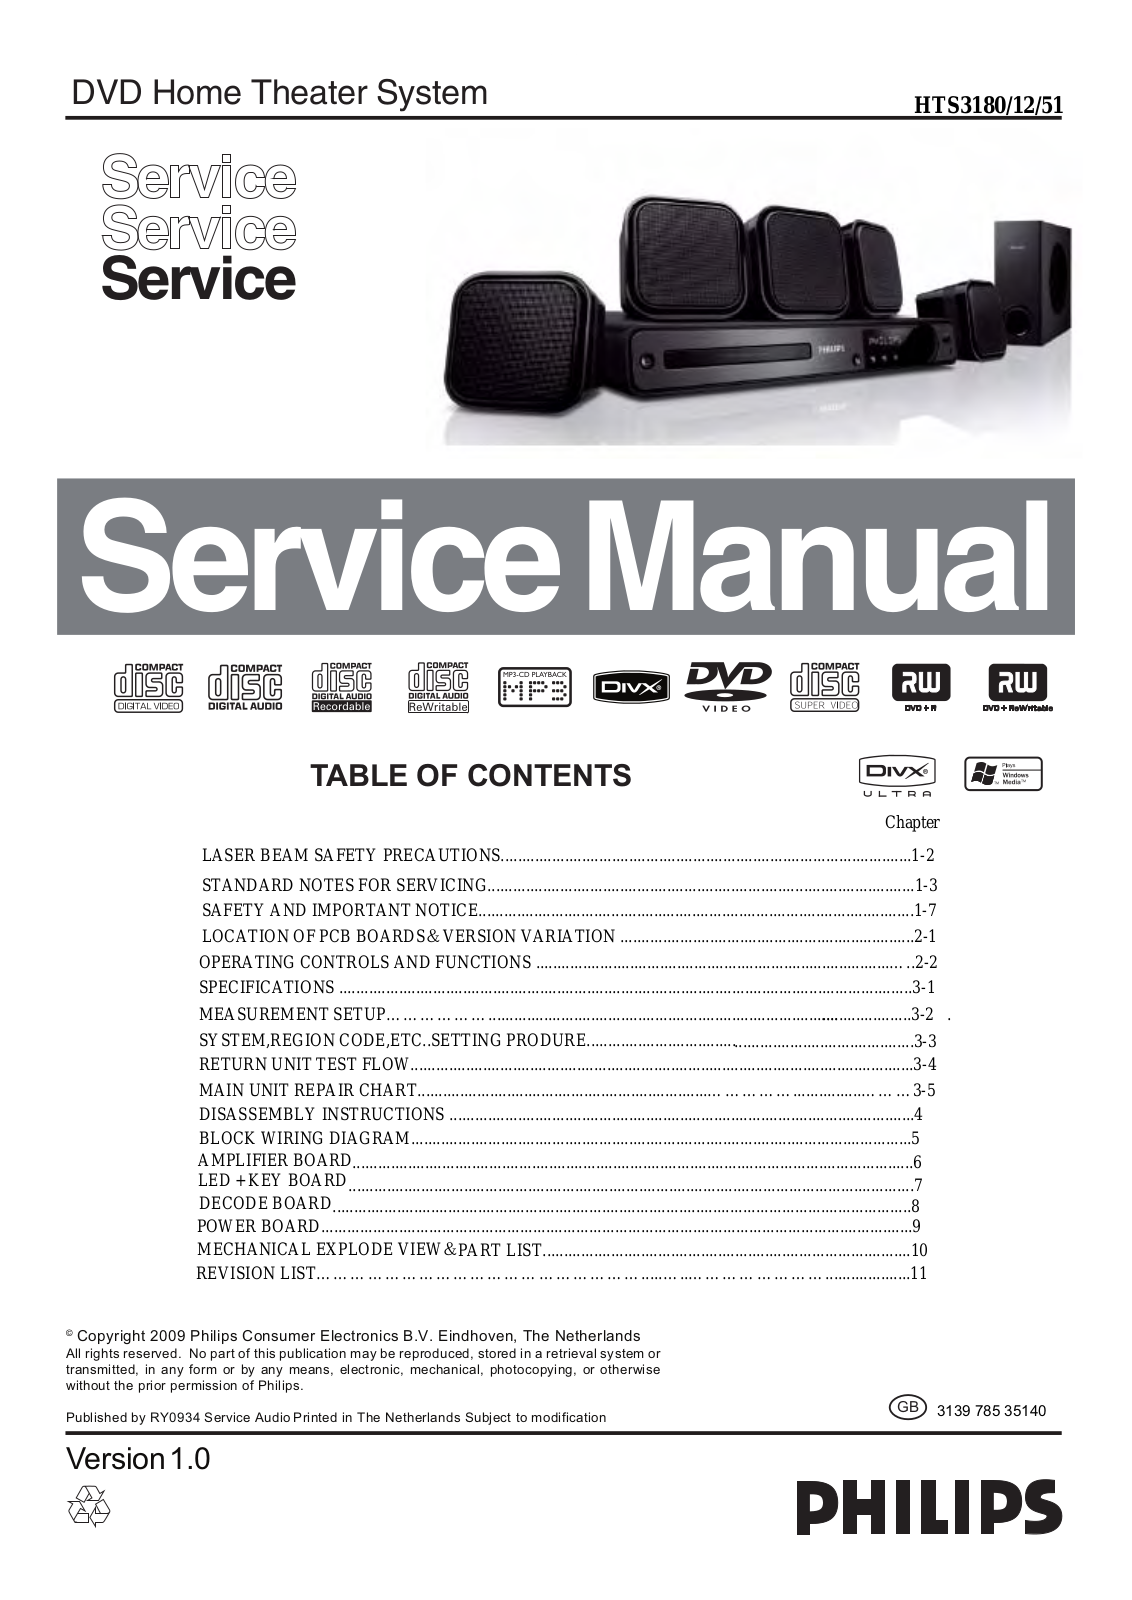 Philips HTS-3180 Service Manual